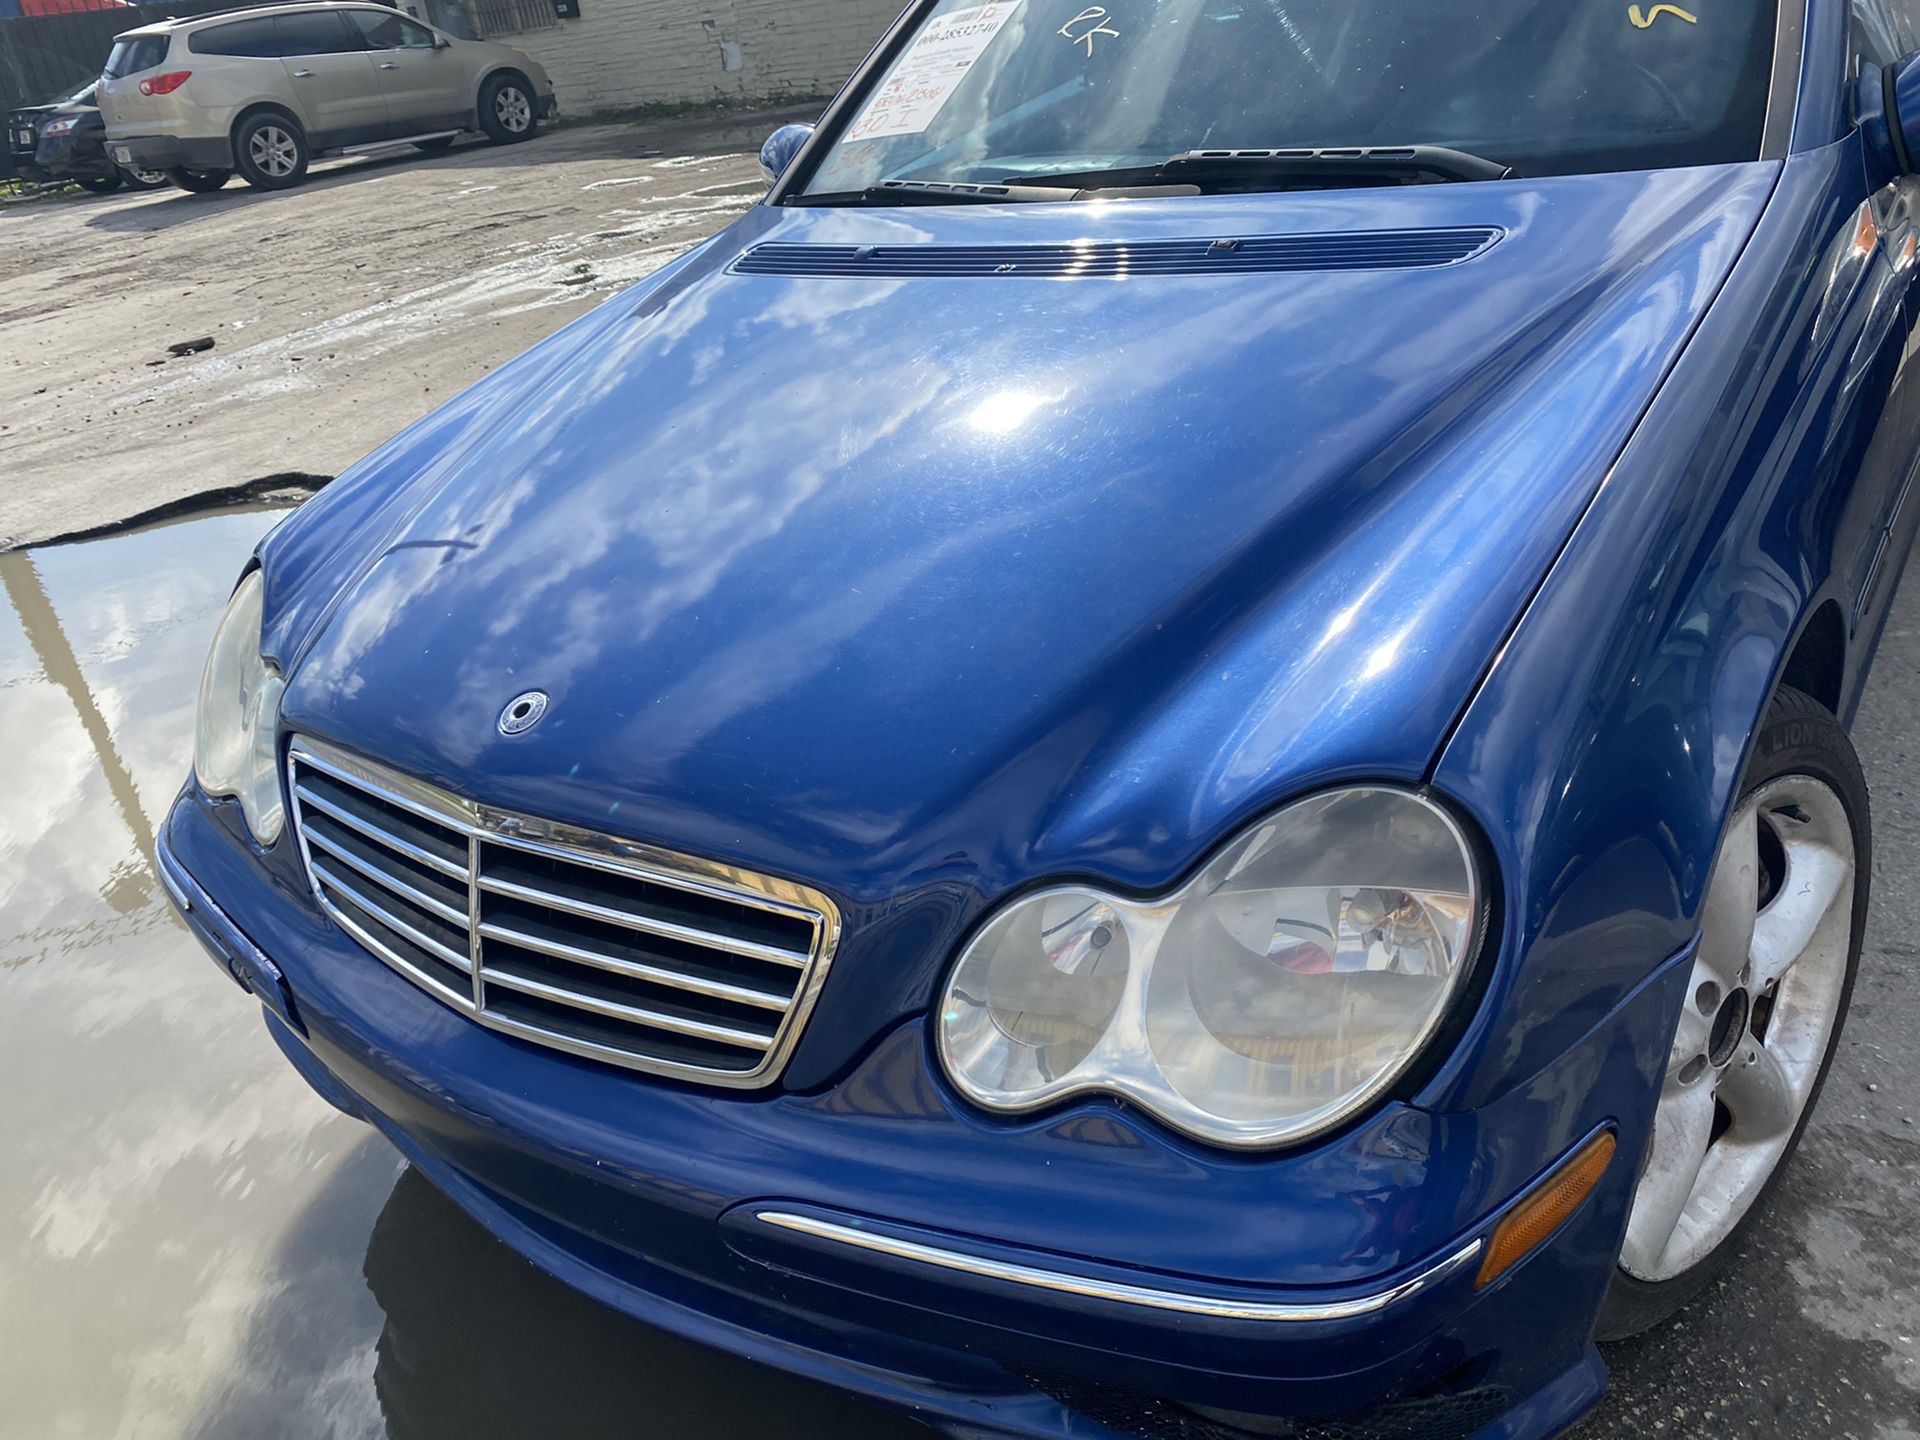 Full Parting Out Mercedes Benz C230 2002-2003-2004-2005